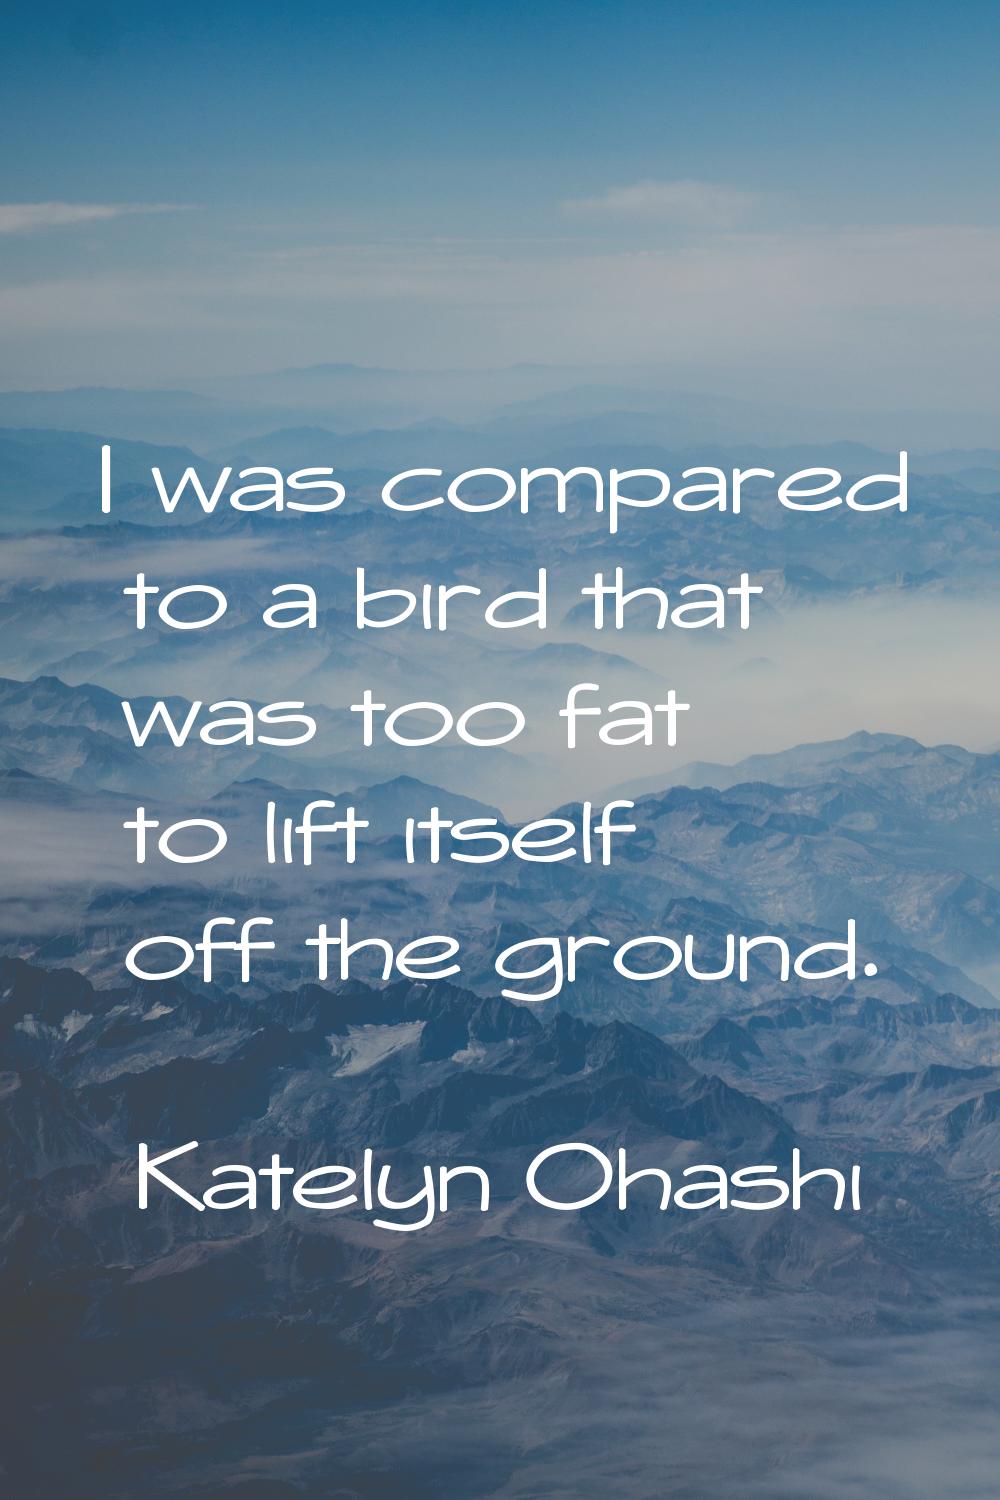 I was compared to a bird that was too fat to lift itself off the ground.